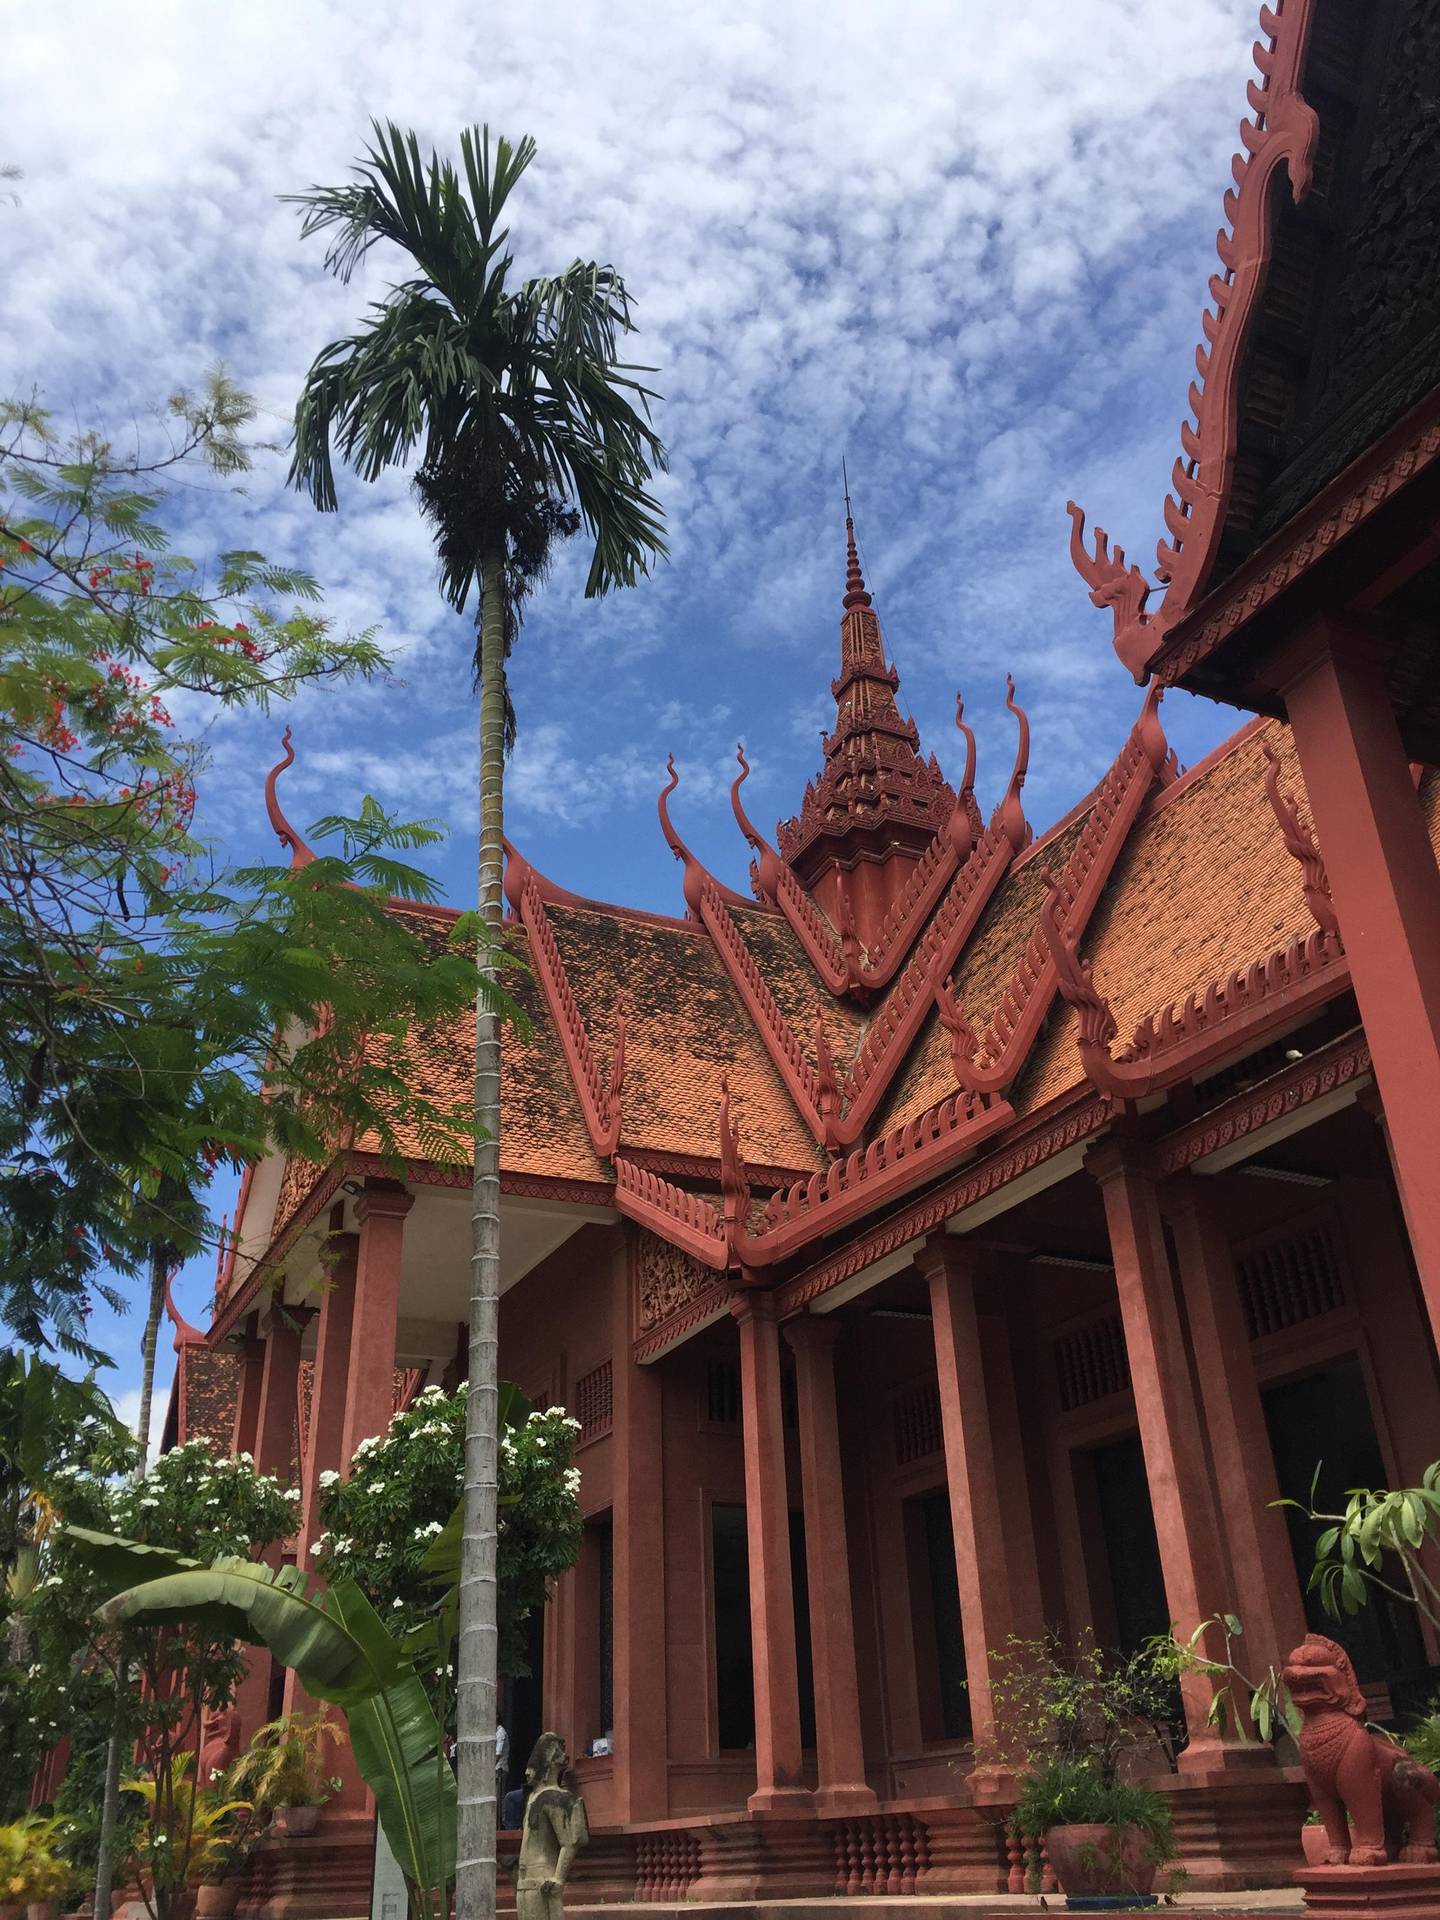 The National Museum of Cambodia in Phnom Penh houses an impressive collection of South East Asian art. Rosemary Behan